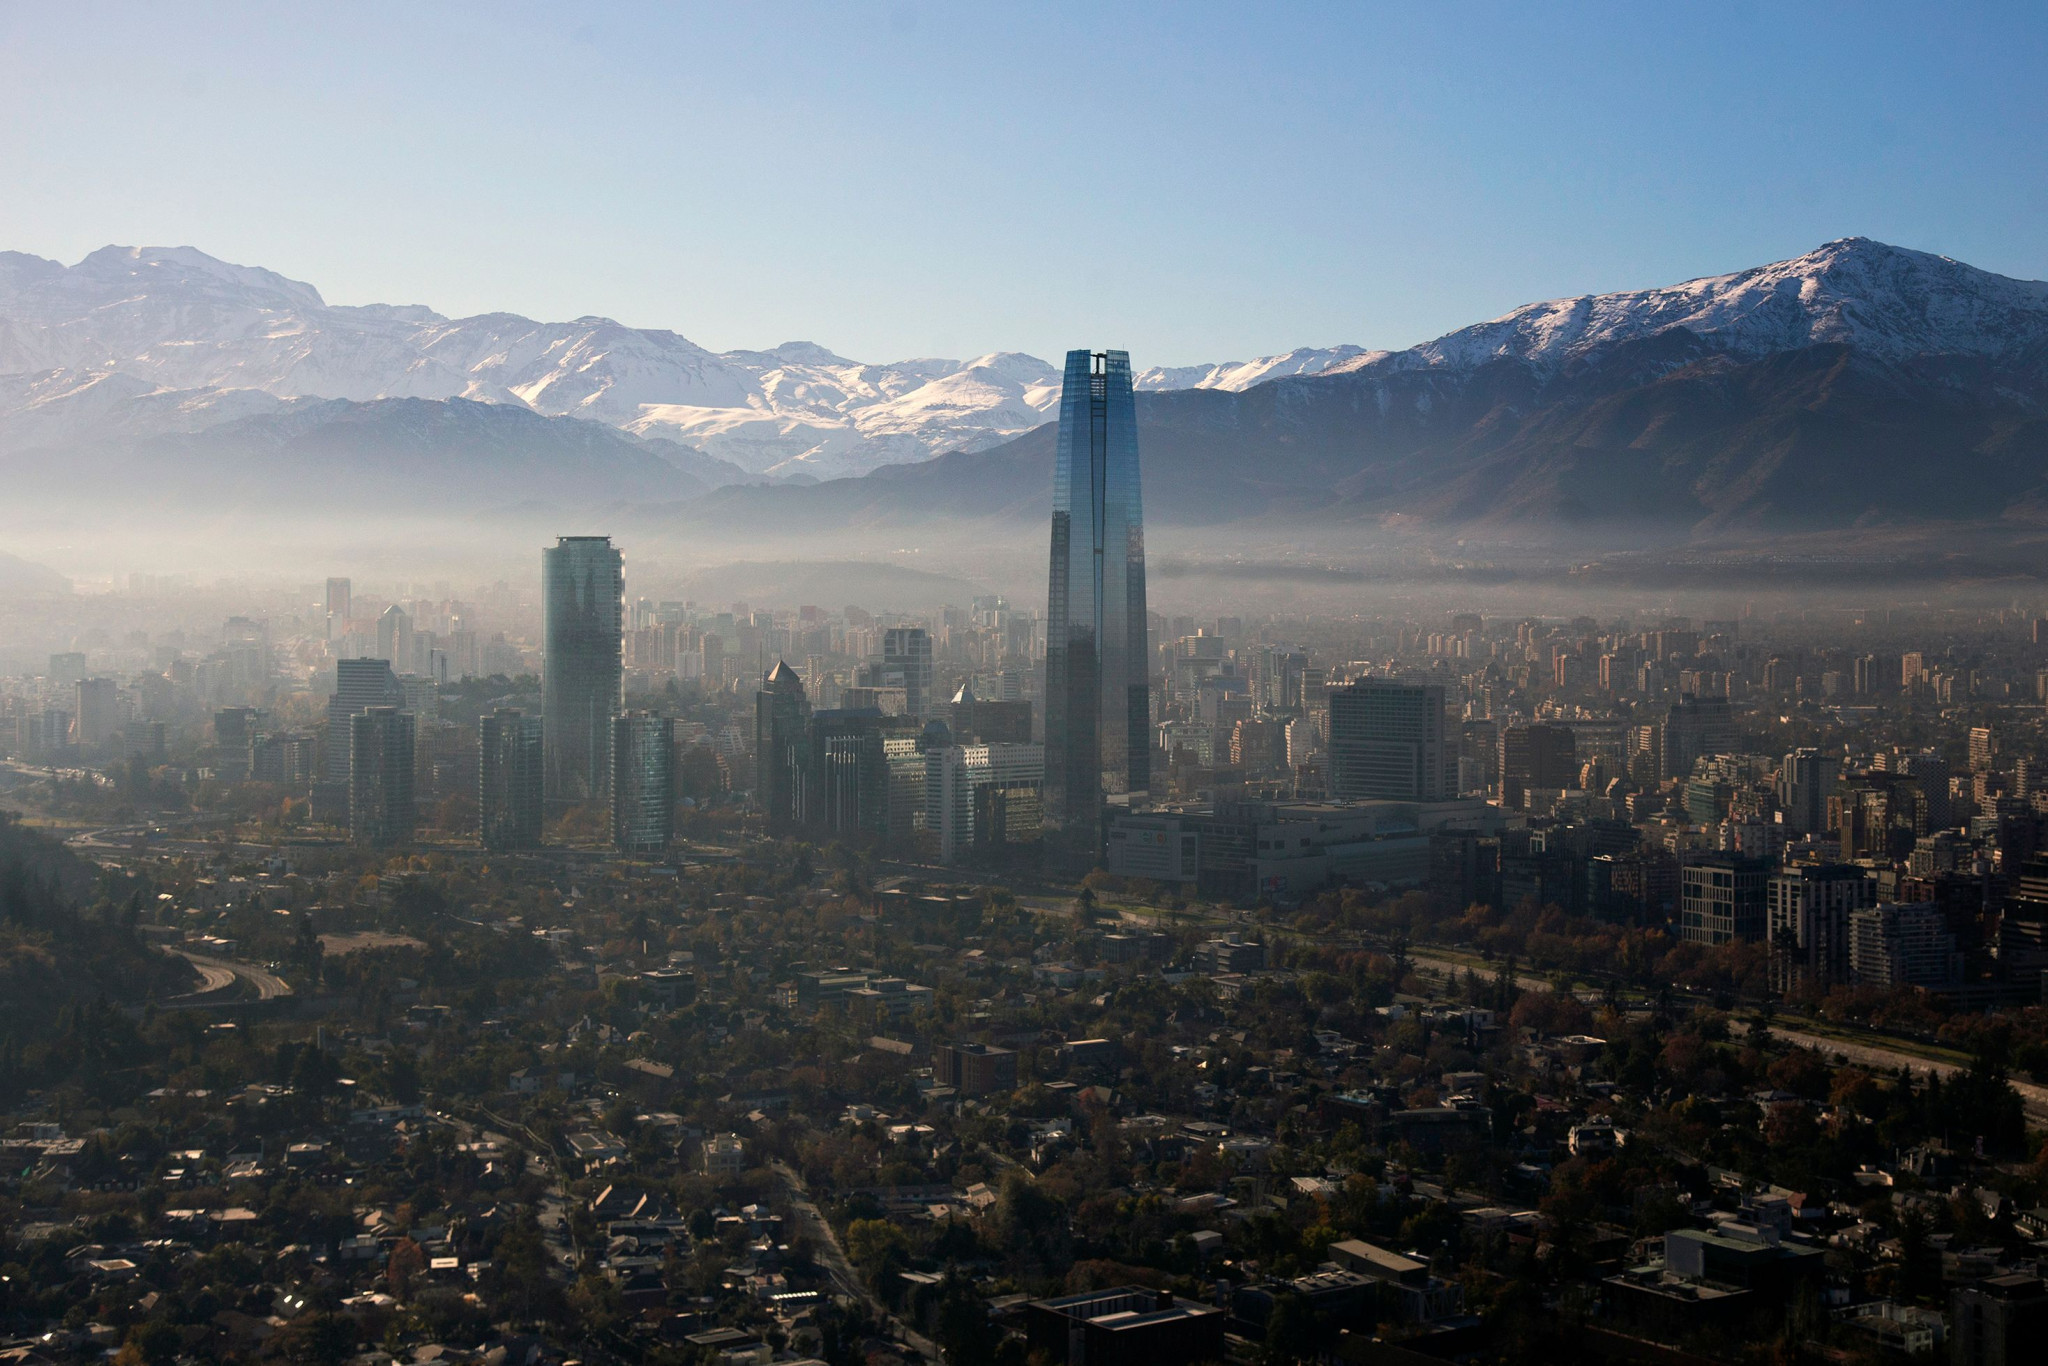 Santiago is set to be the first Chilean city to stage the Pan American Games ©Getty Images